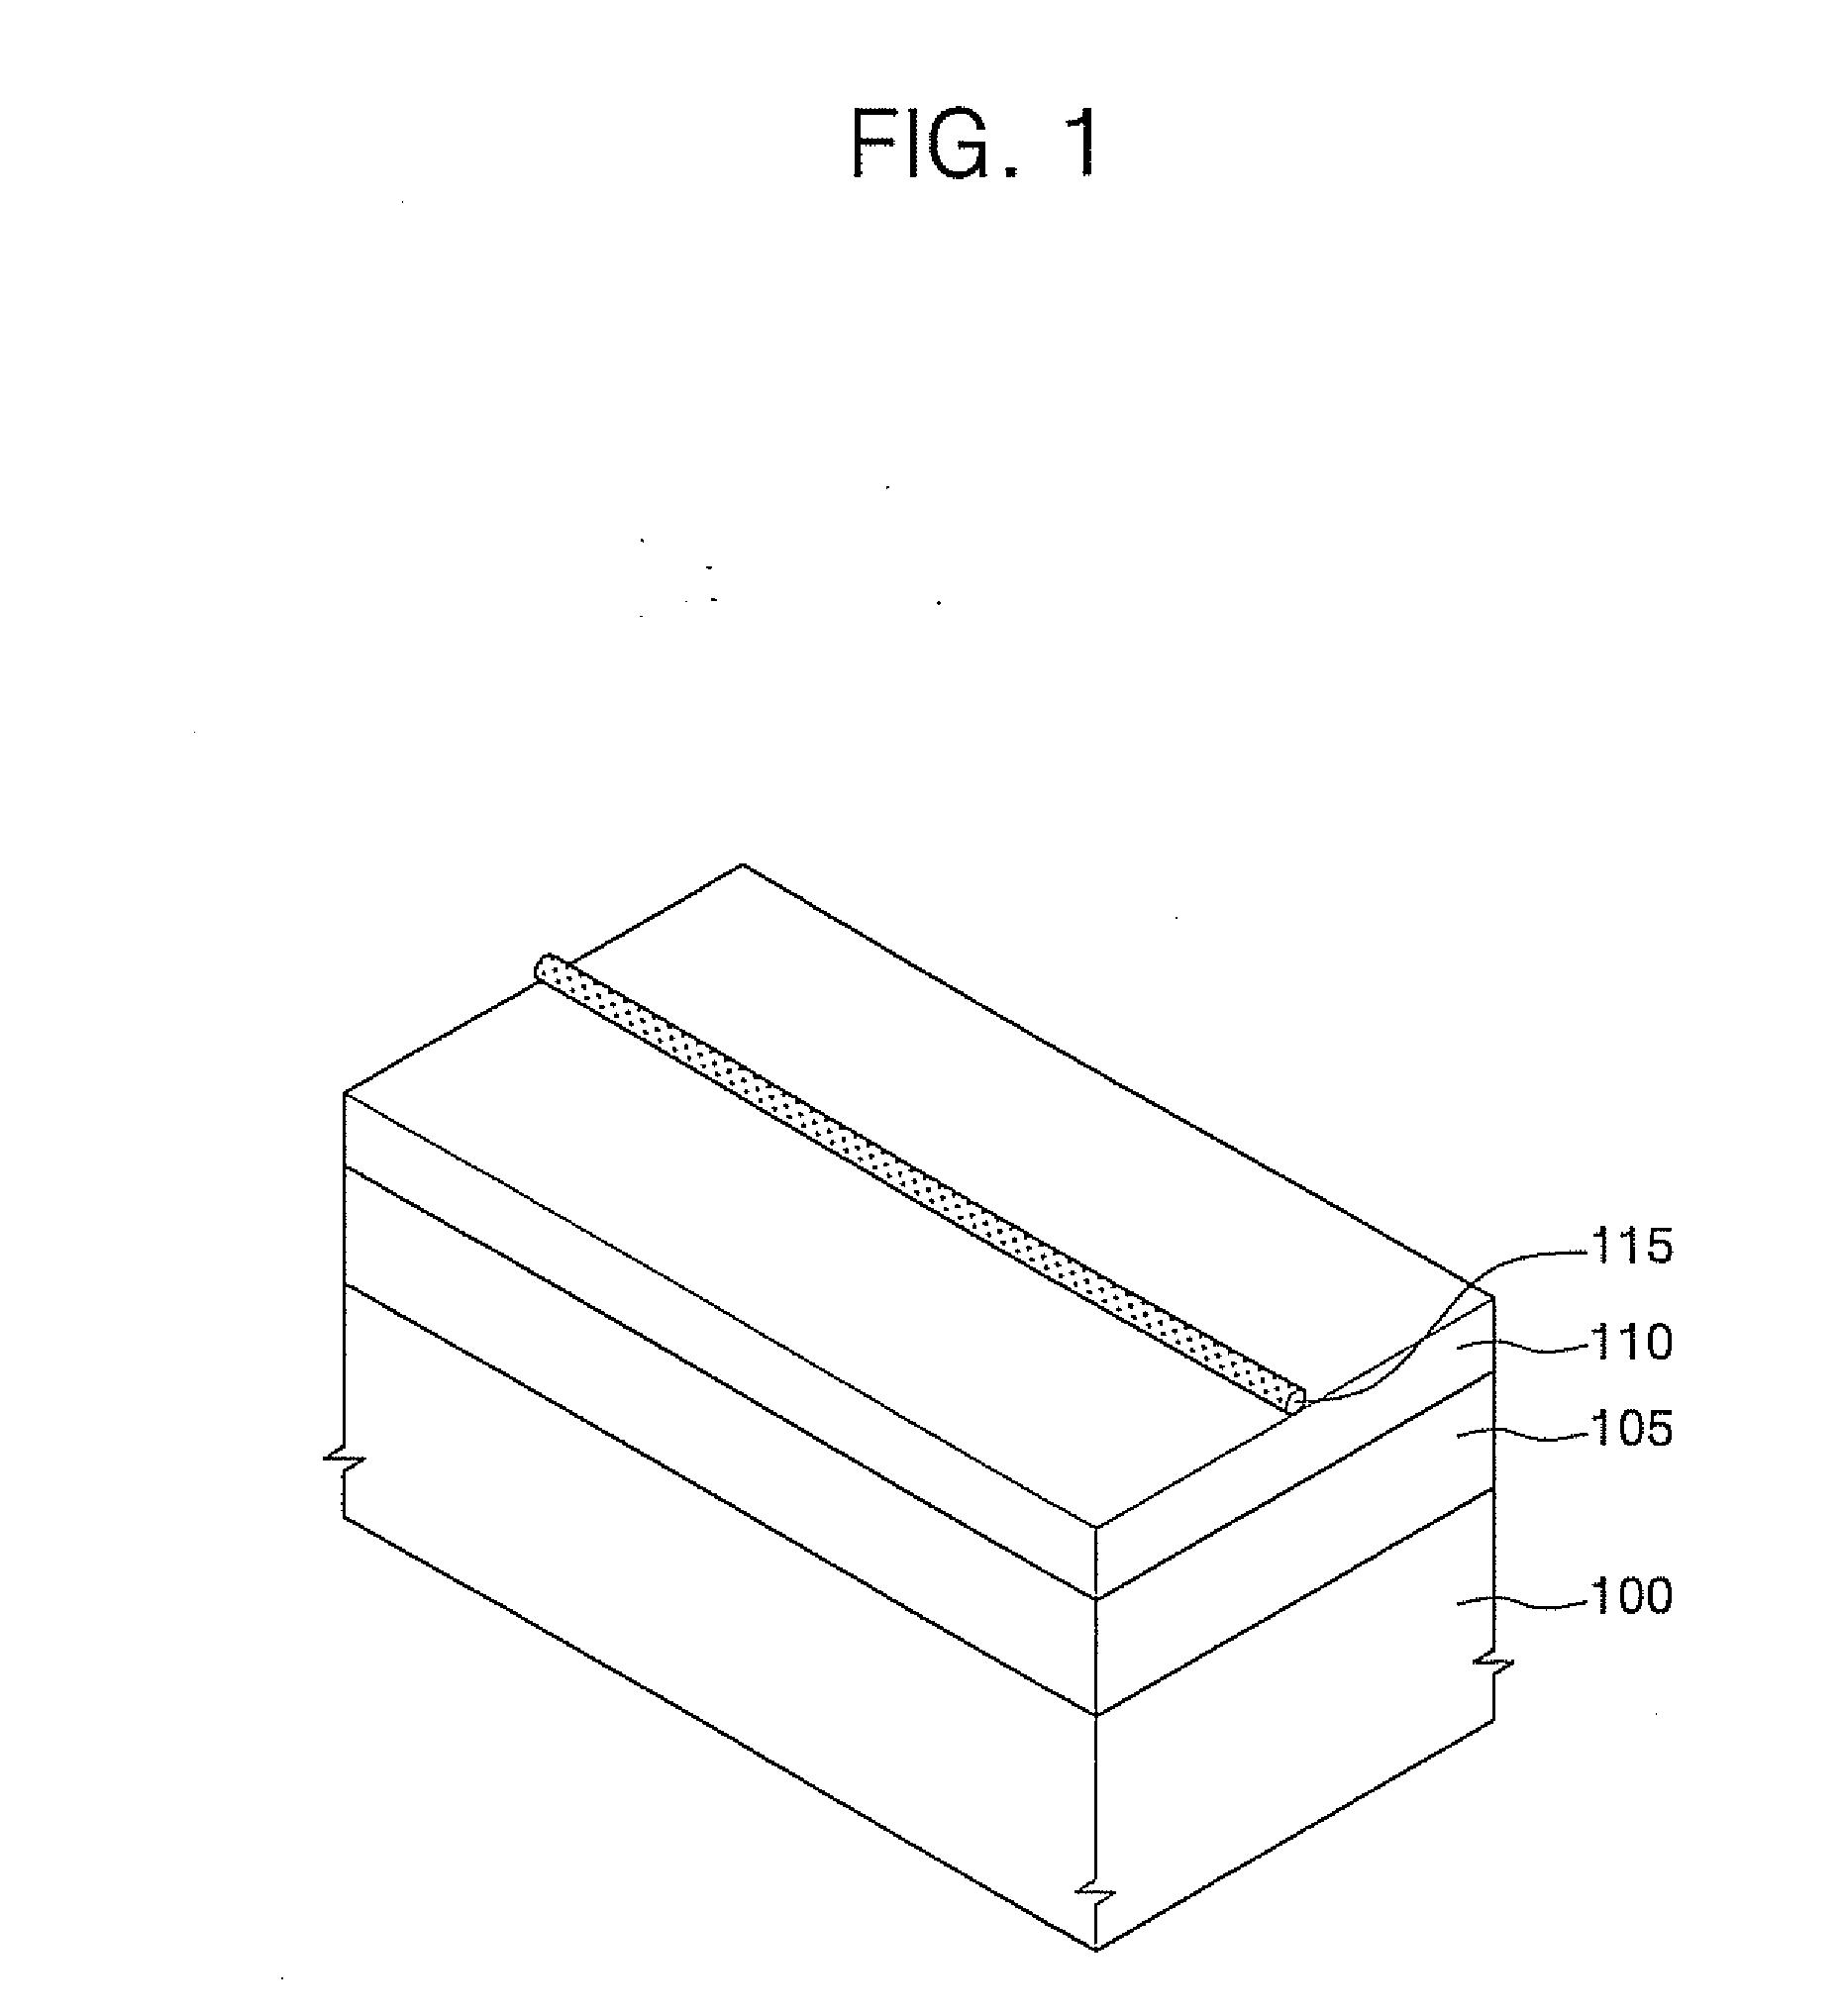 Semiconductor Devices Having Nano-Line Channels and Methods of Fabricating the Same